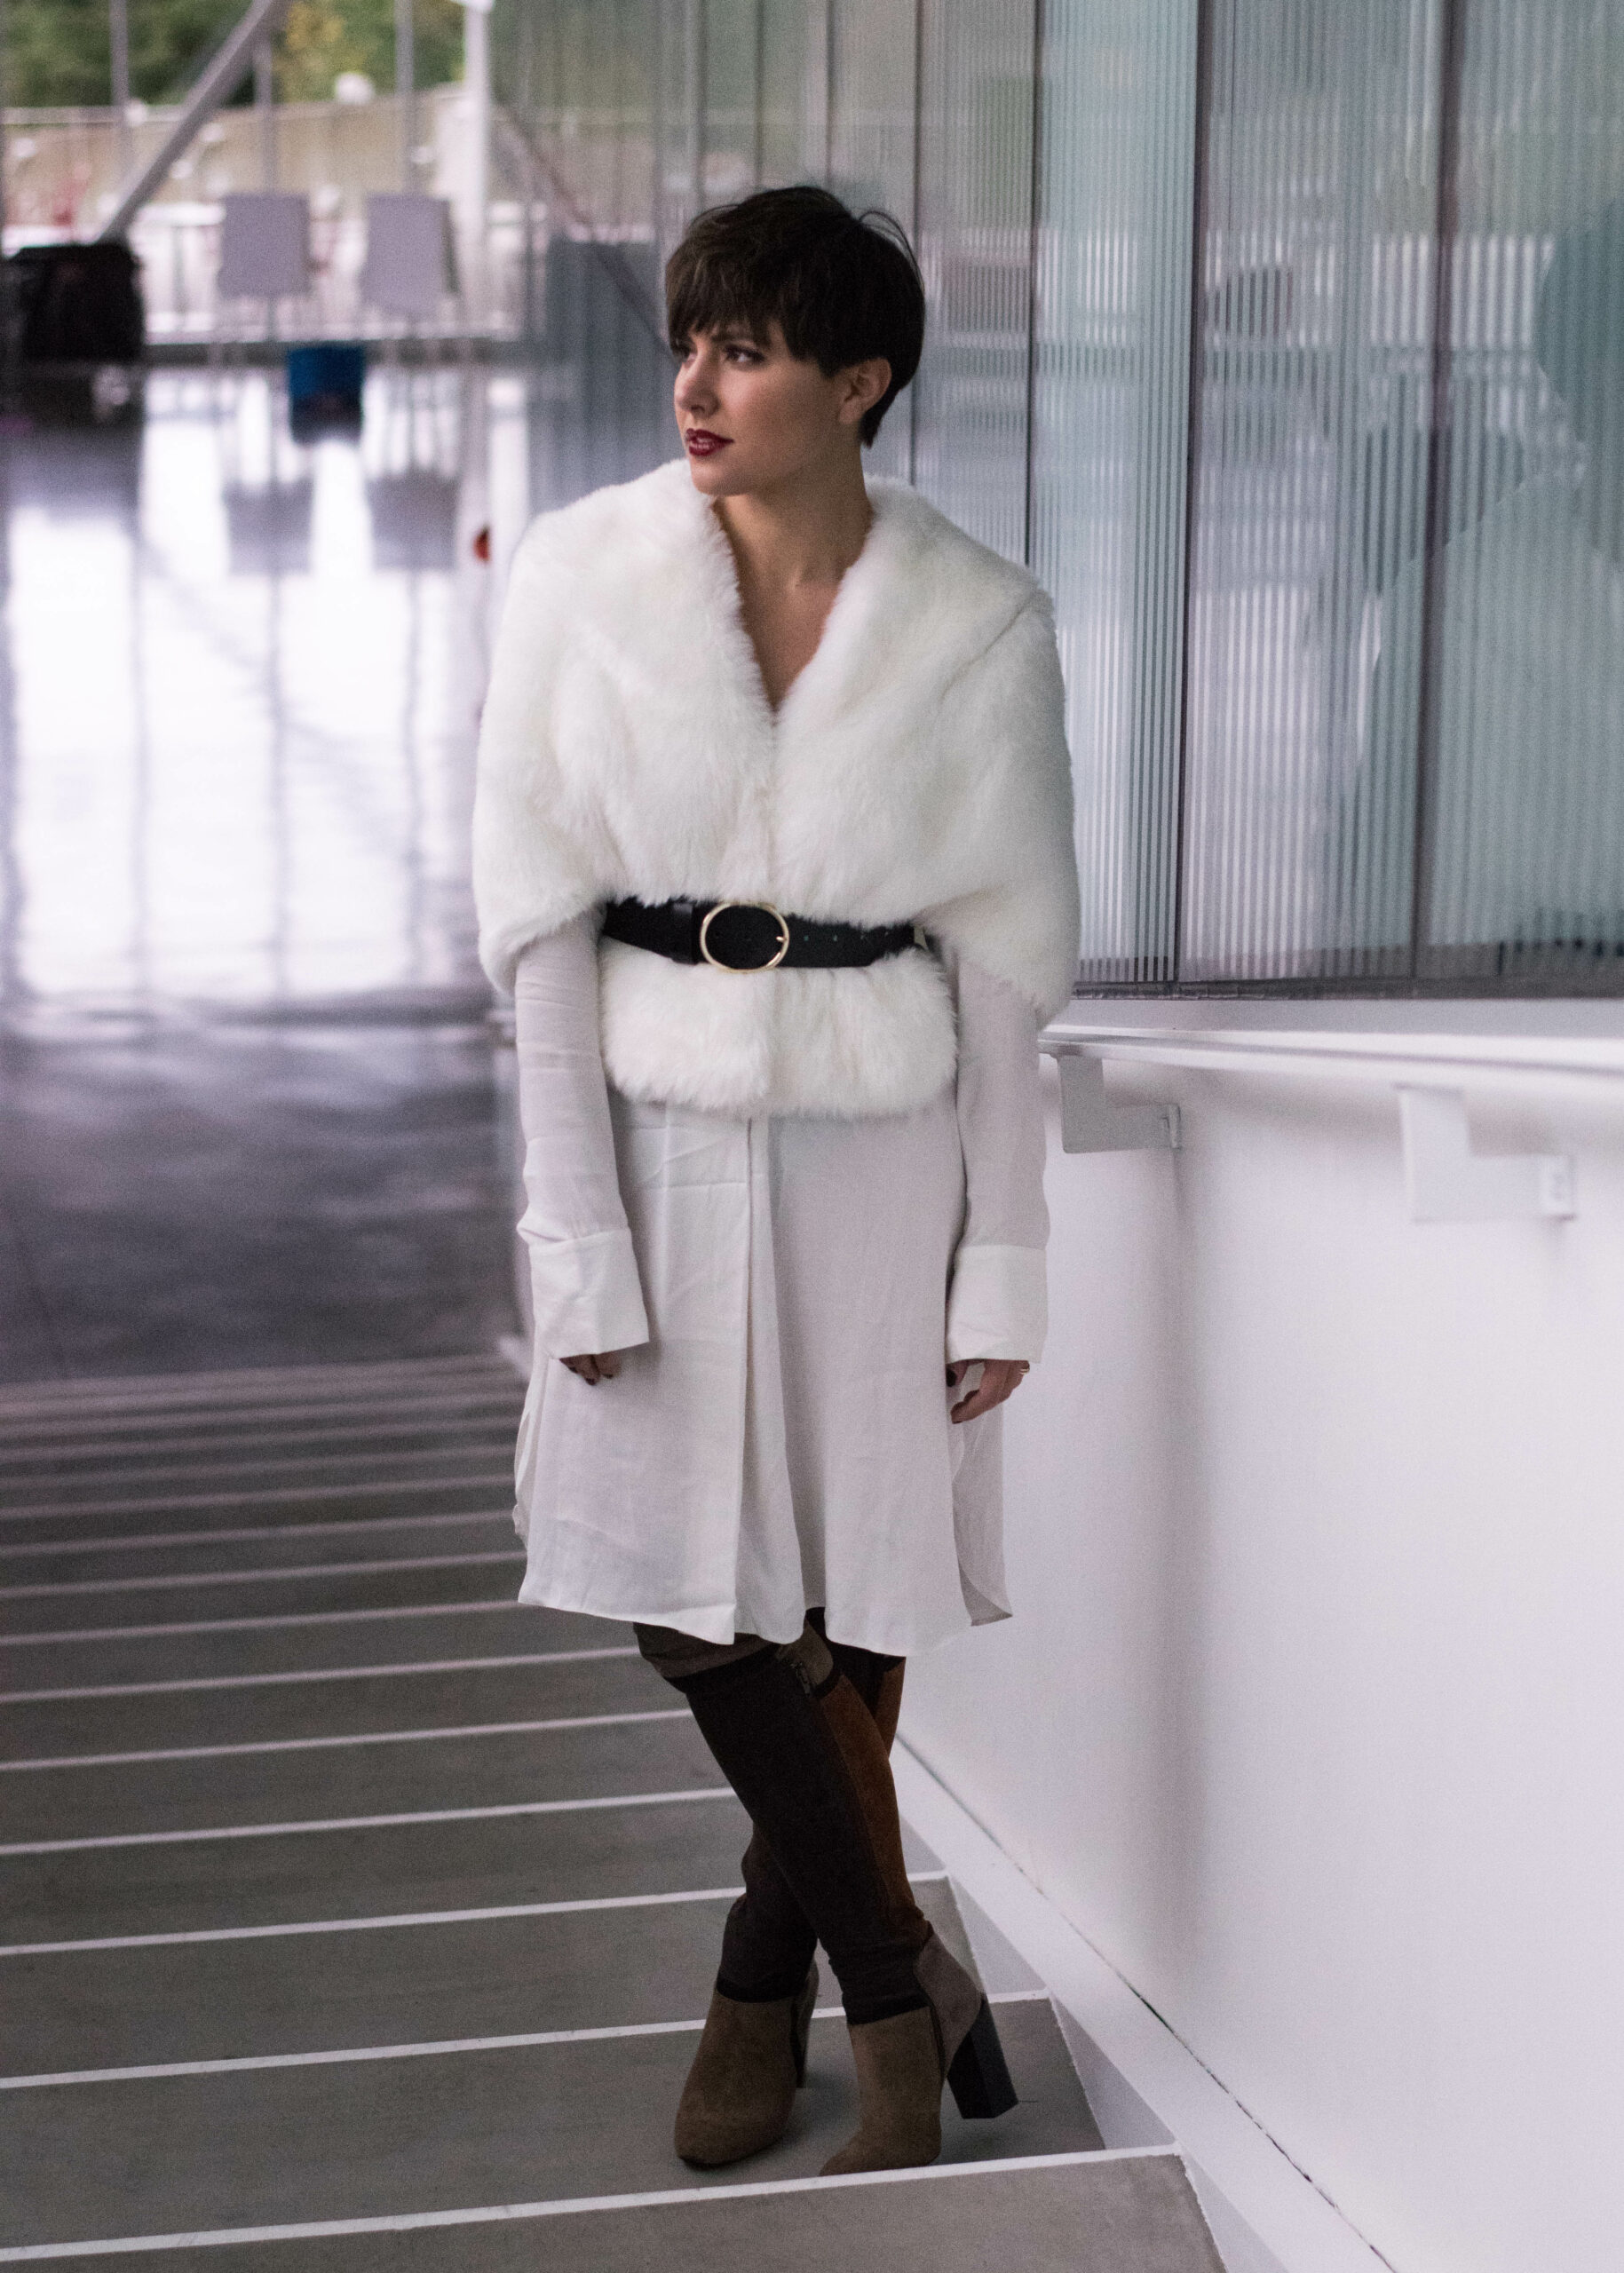 An All White Holiday Party Look that is Already In Your Closet